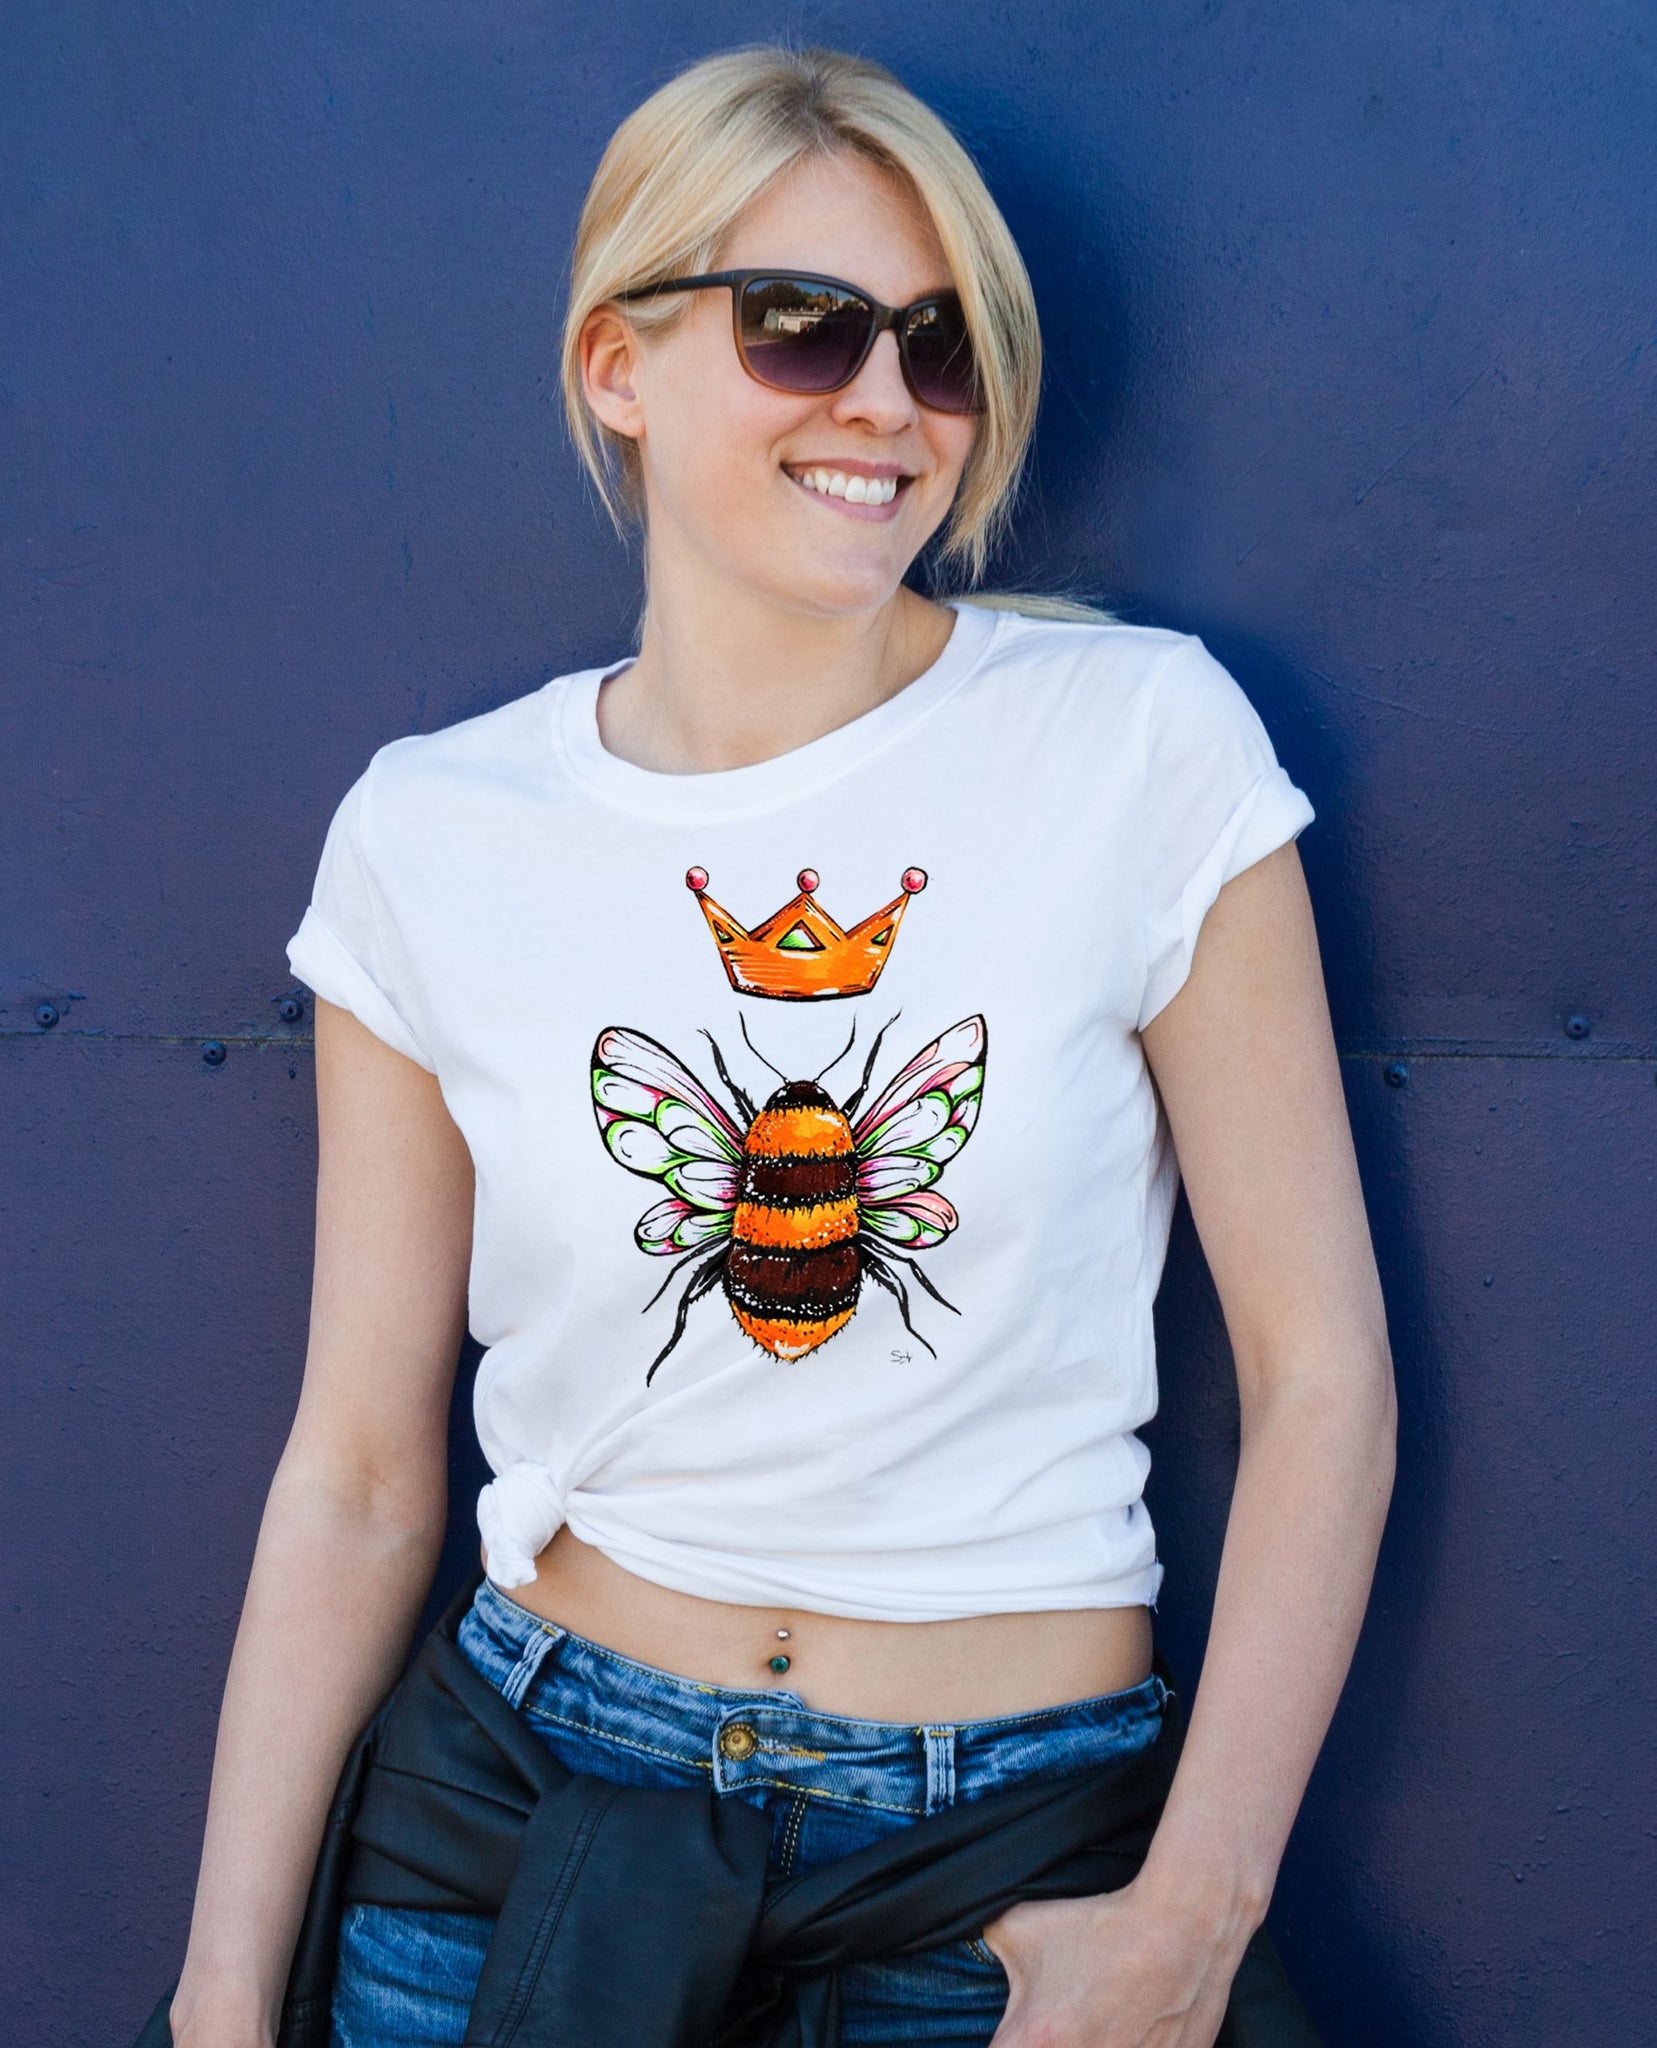 Queen Bee - Ladies T-Shirt (UK Sizes 8-40) - Artwork by the Very Talented Artist Sarah Neville - Made to Order